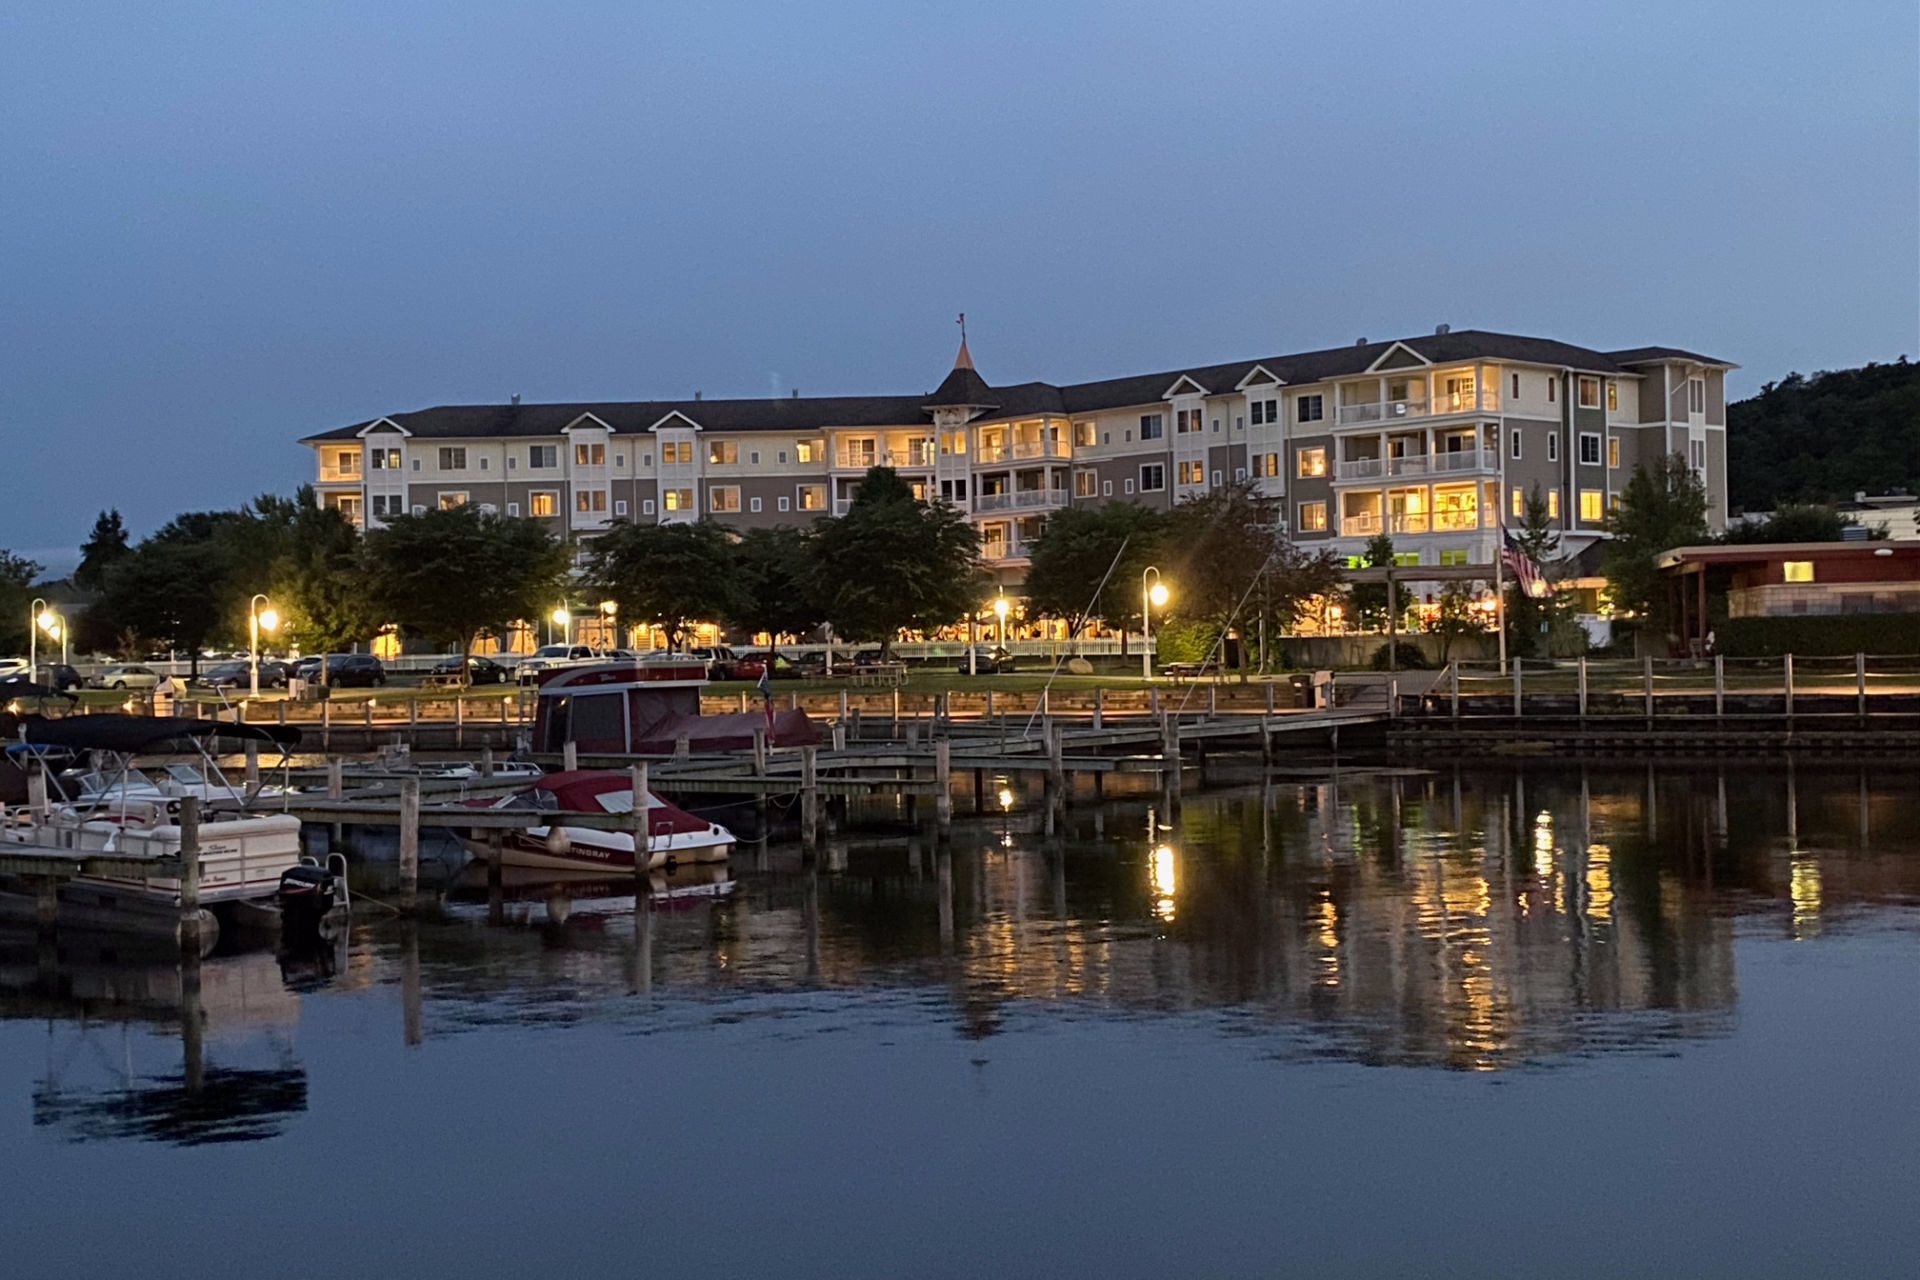 Watkins Glen Harbor Hotel at night from the water